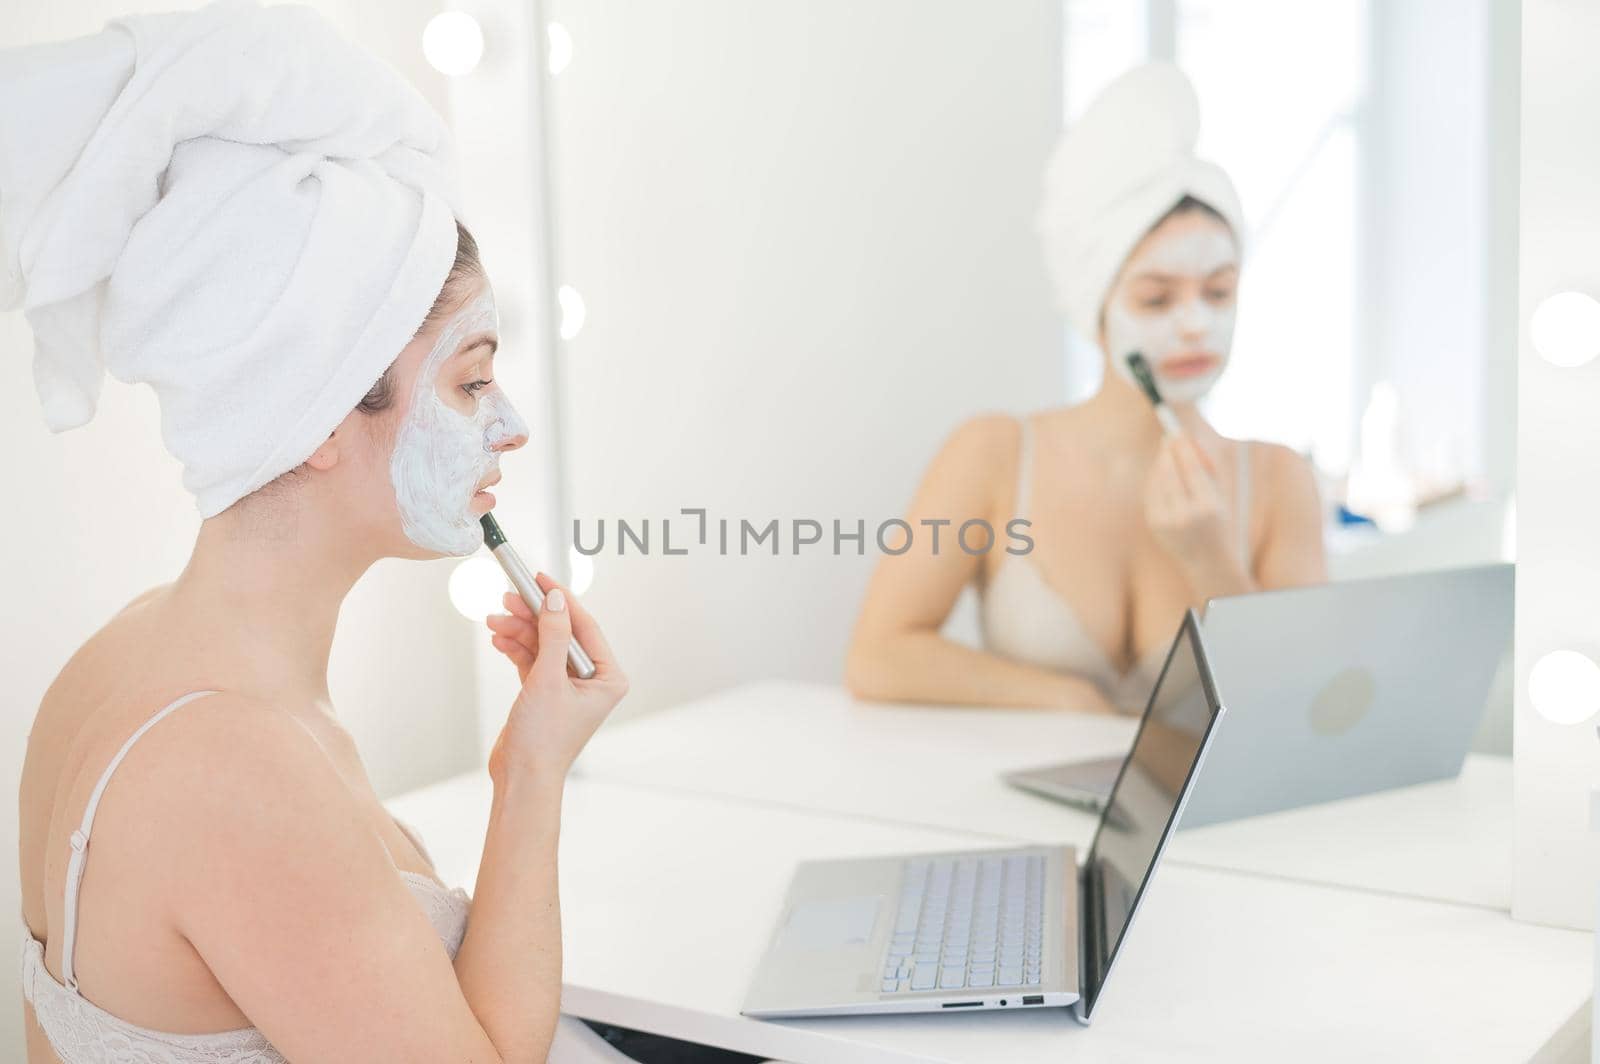 Caucasian woman applying face mask and looking at laptop manual. by mrwed54